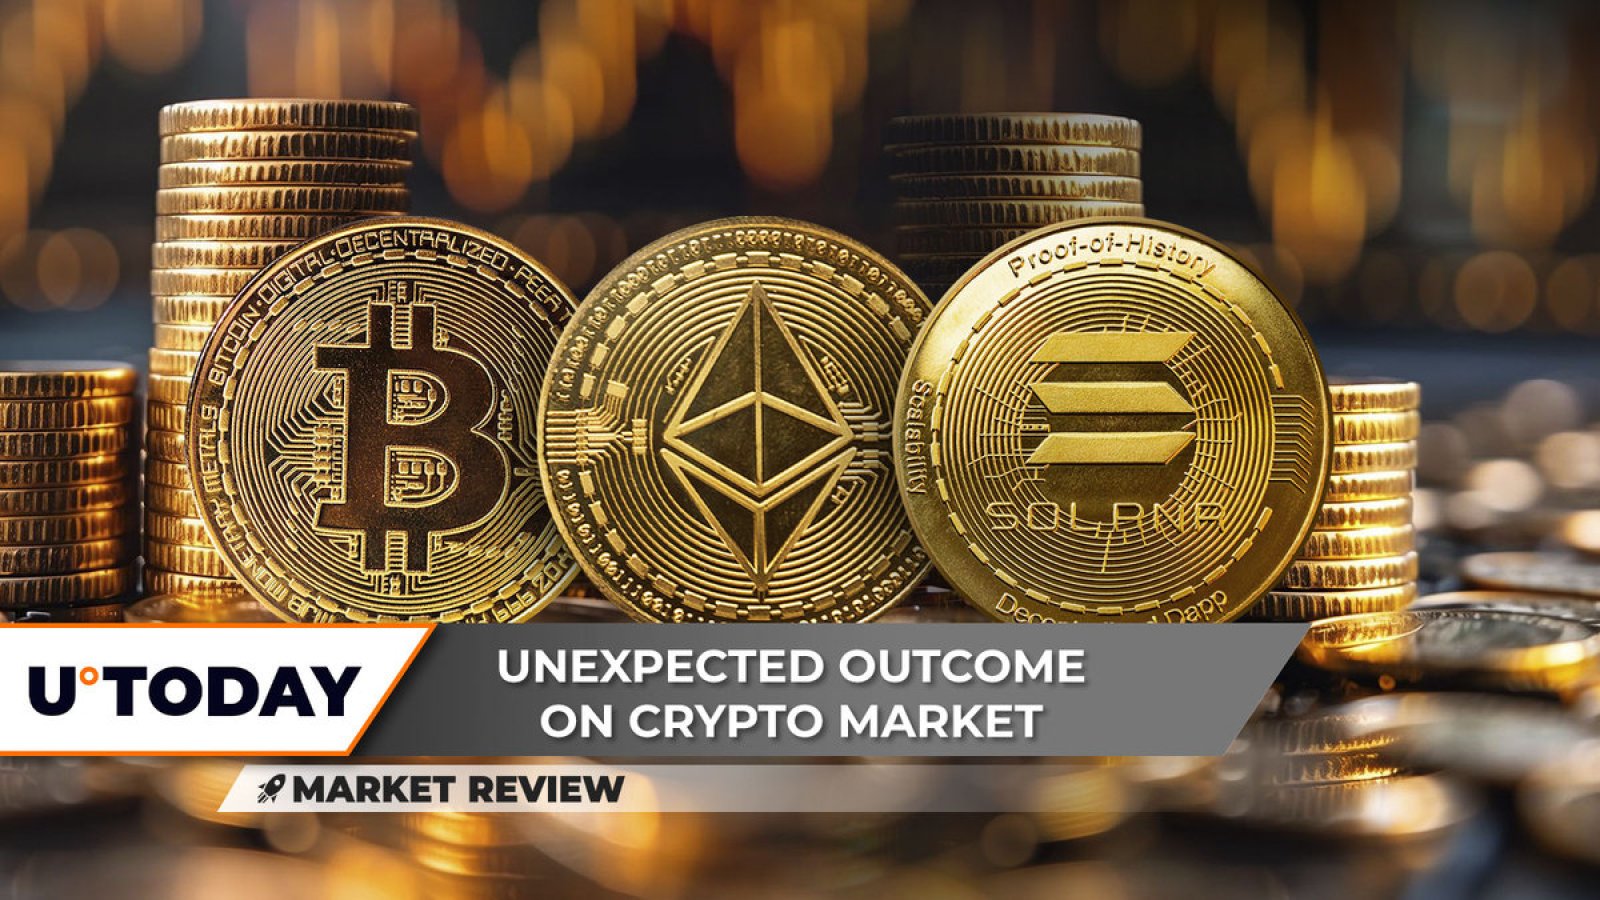 Bitcoin (BTC) Drops Below $60,000, Ethereum (ETH) Says Goodbye to $3,000, Solana (SOL) Strength Disappears: Is Bull Market Over?